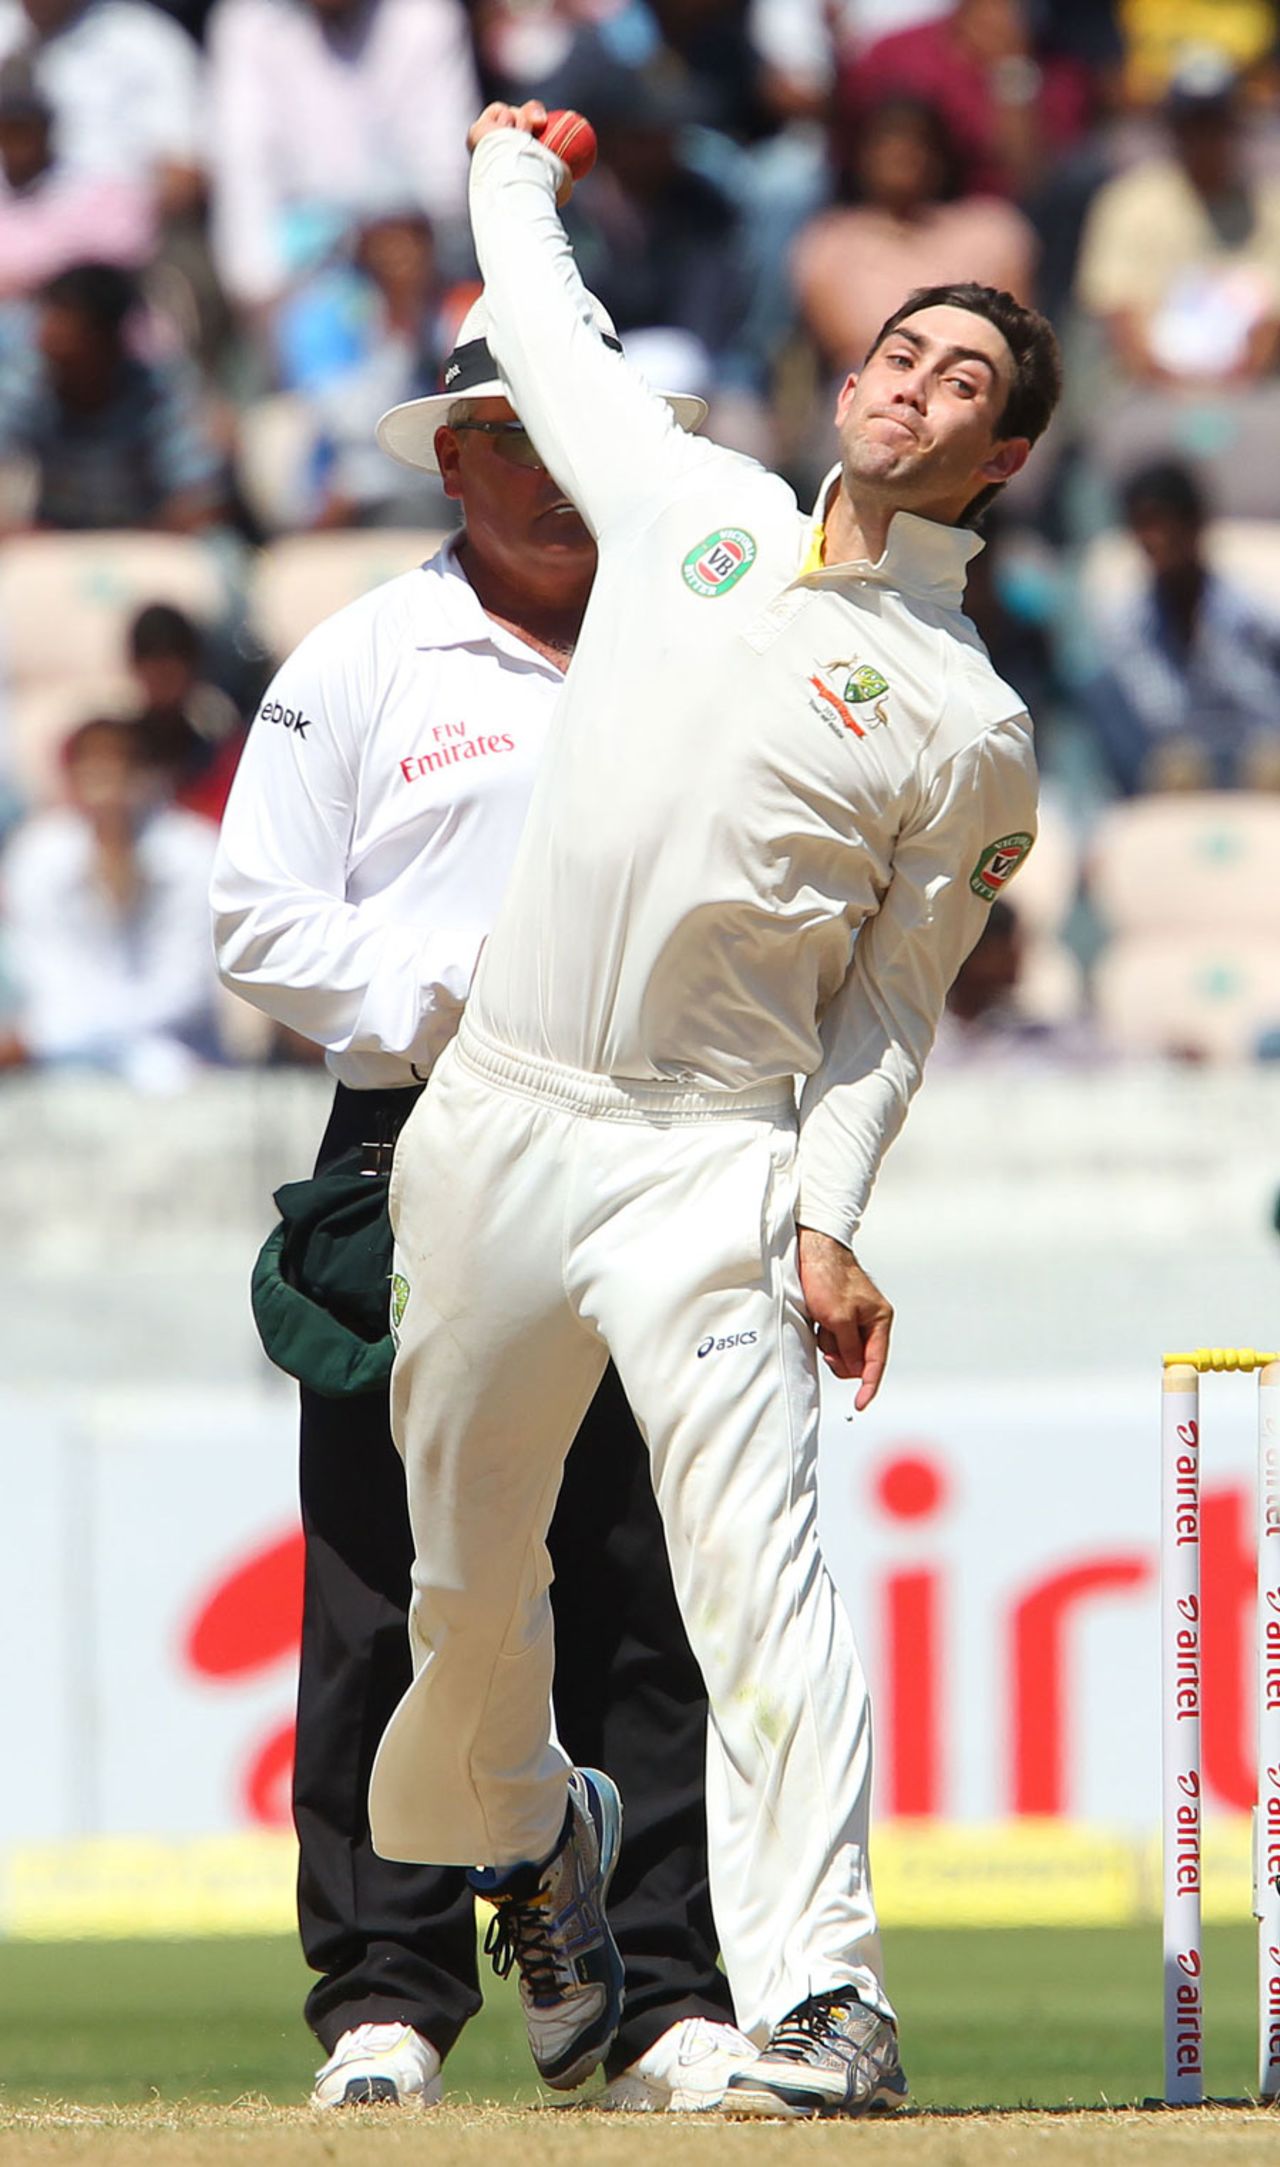 Glenn Maxwell in his bowling stride, India v Australia, 2nd Test, Hyderabad, 2nd day, March 3, 2013